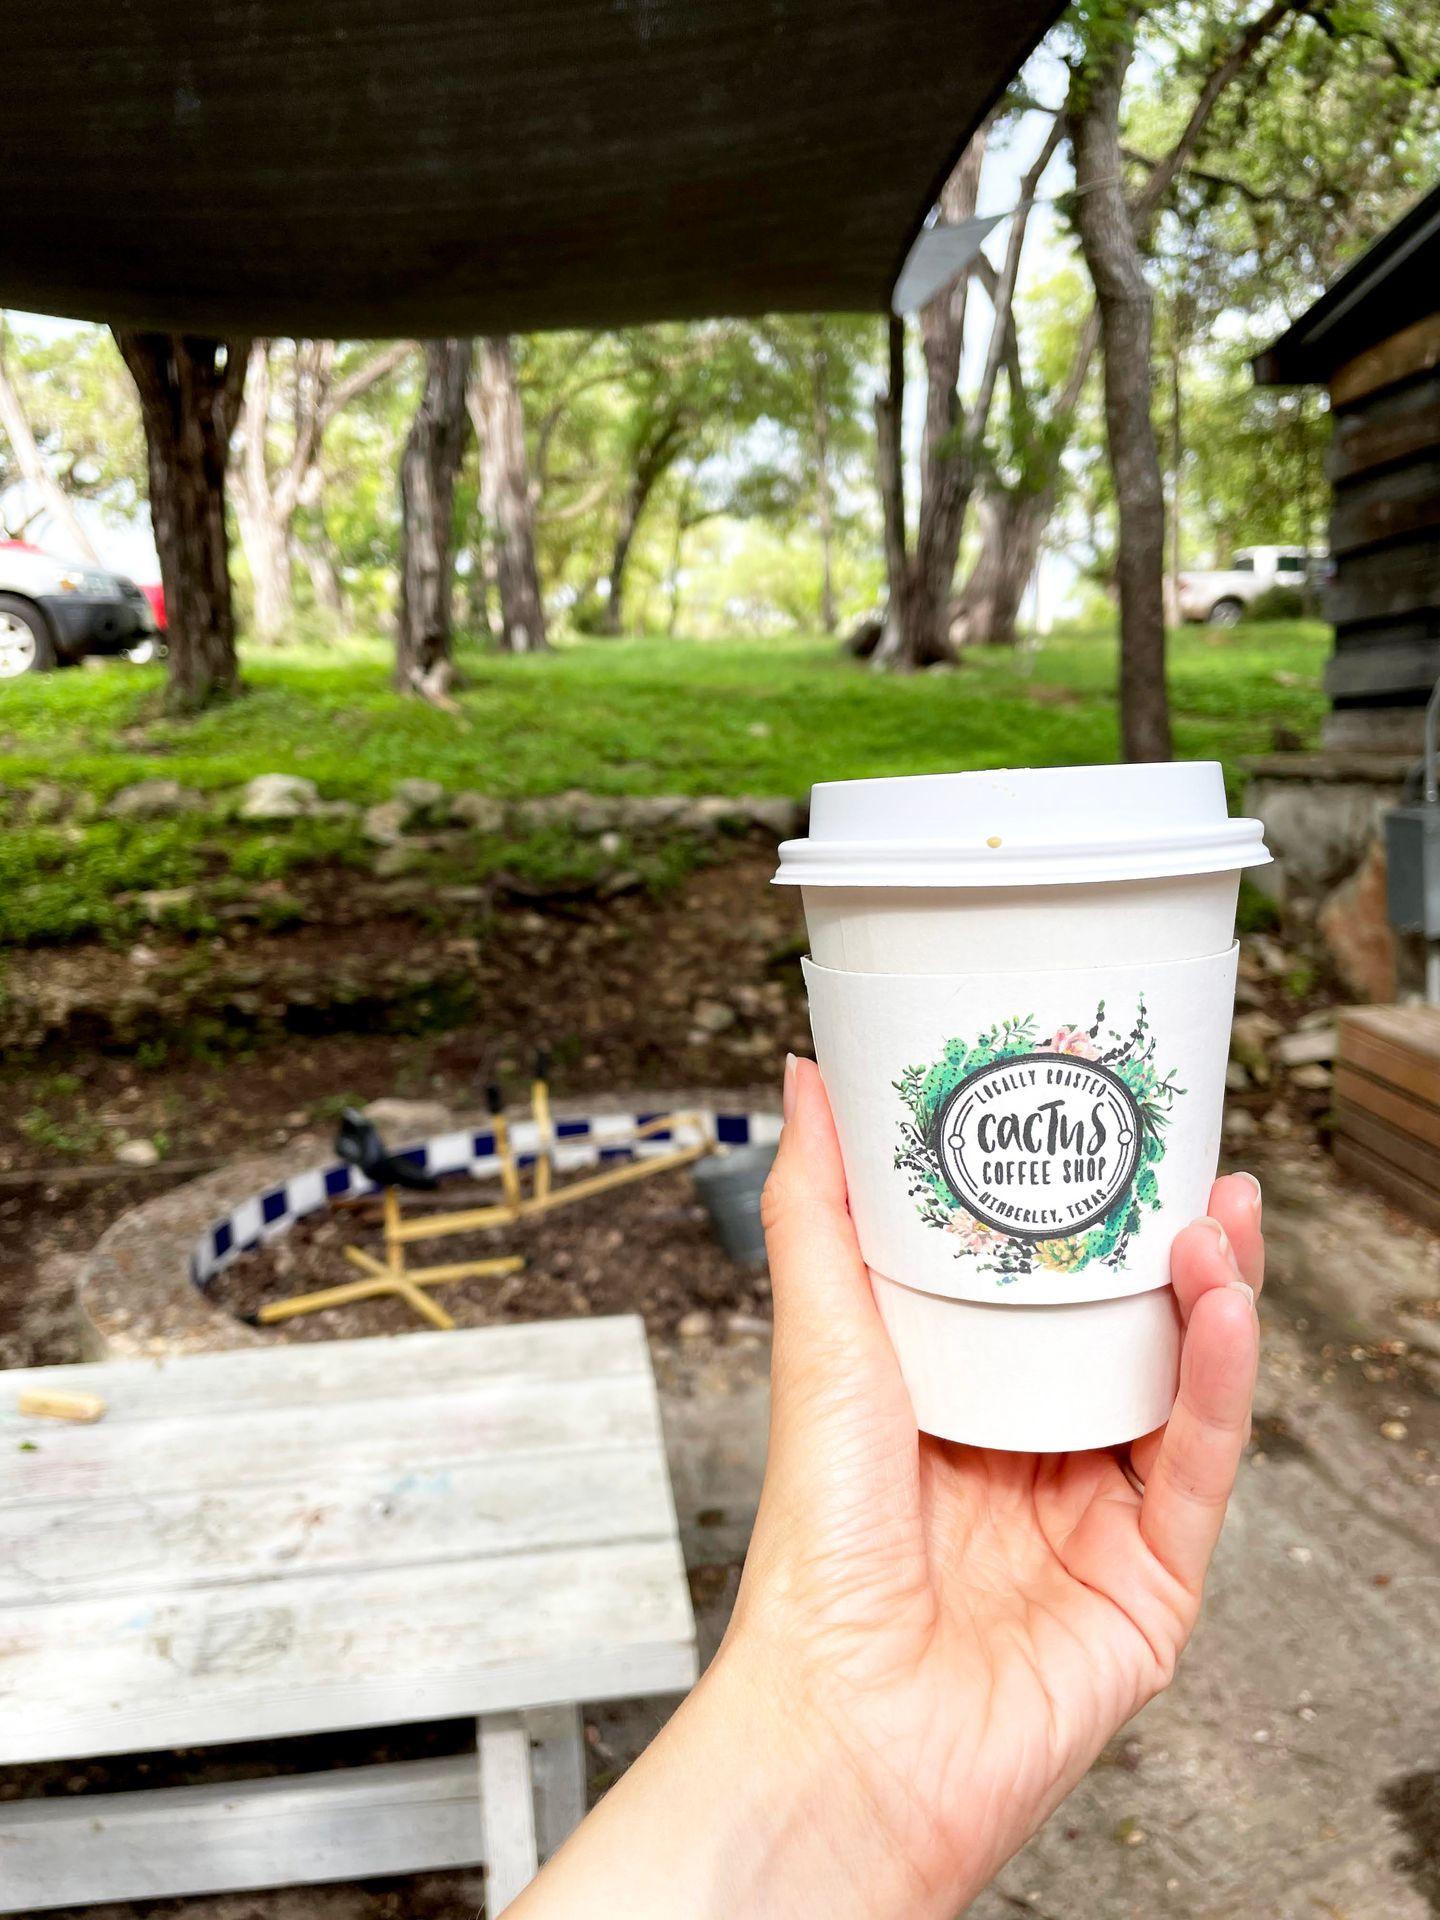 Holding up a coffee cup outside of Sugar Shack Bakery.